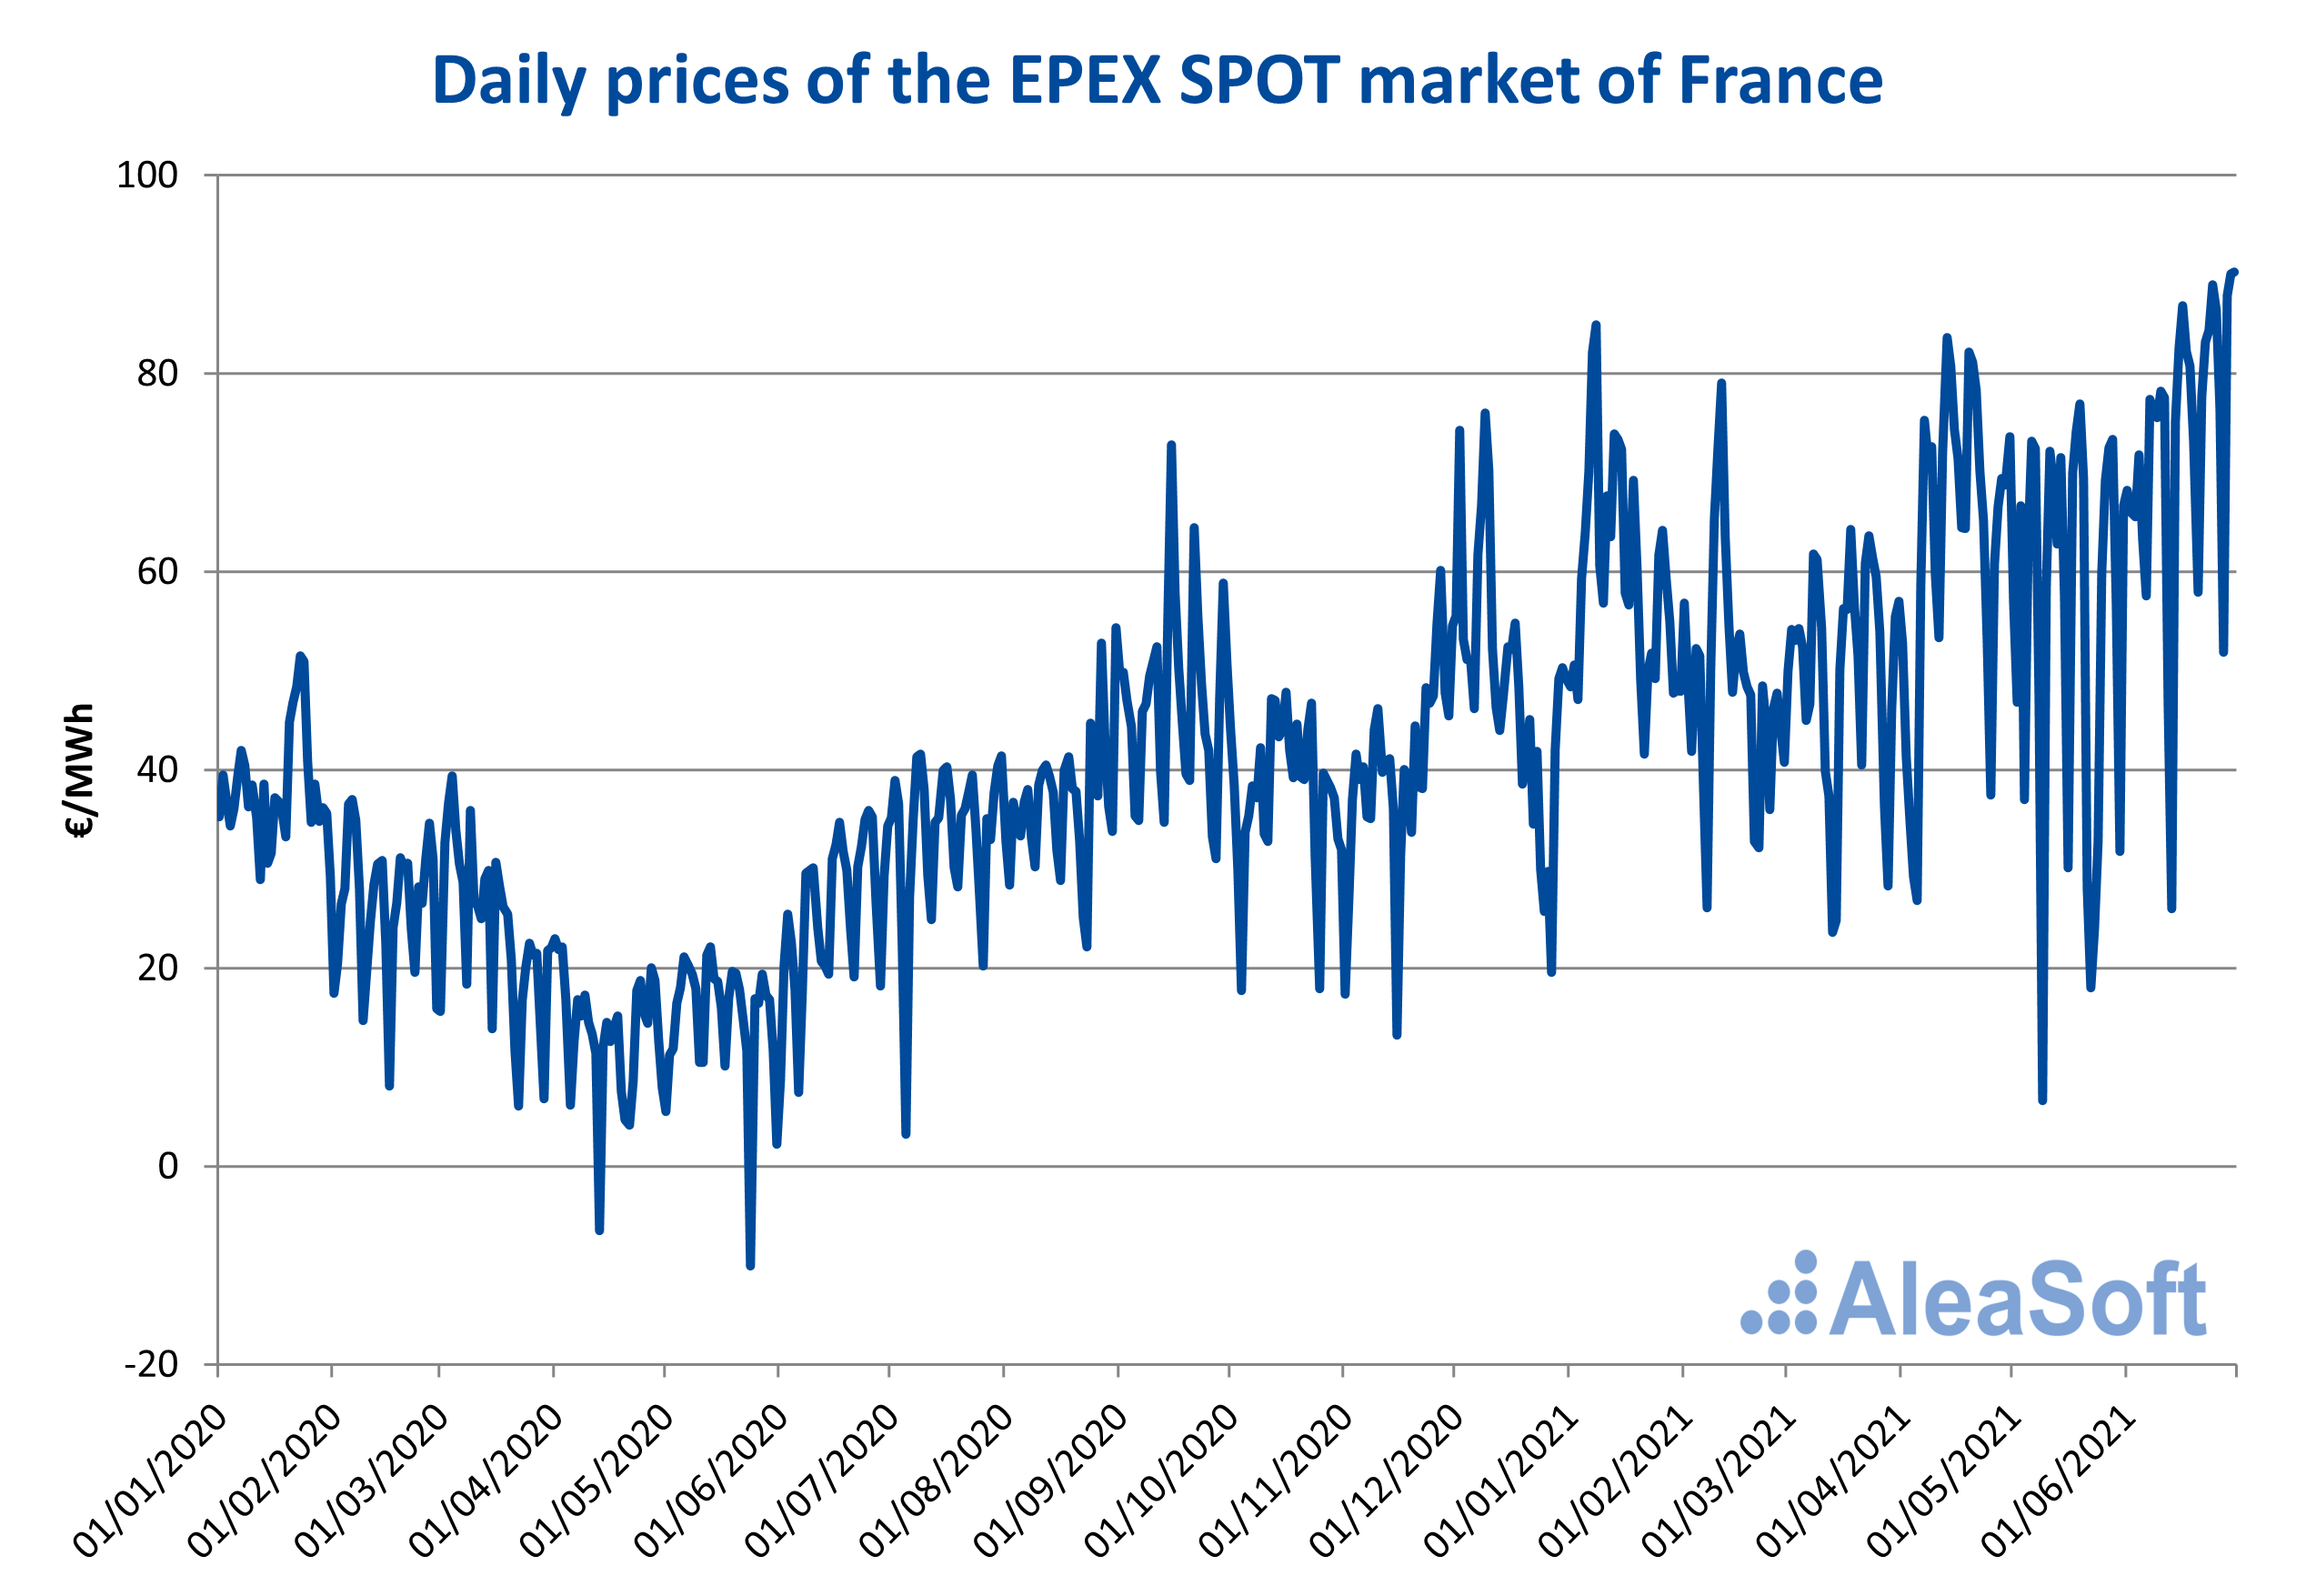 AleaSoft - daily market prices epex spot france